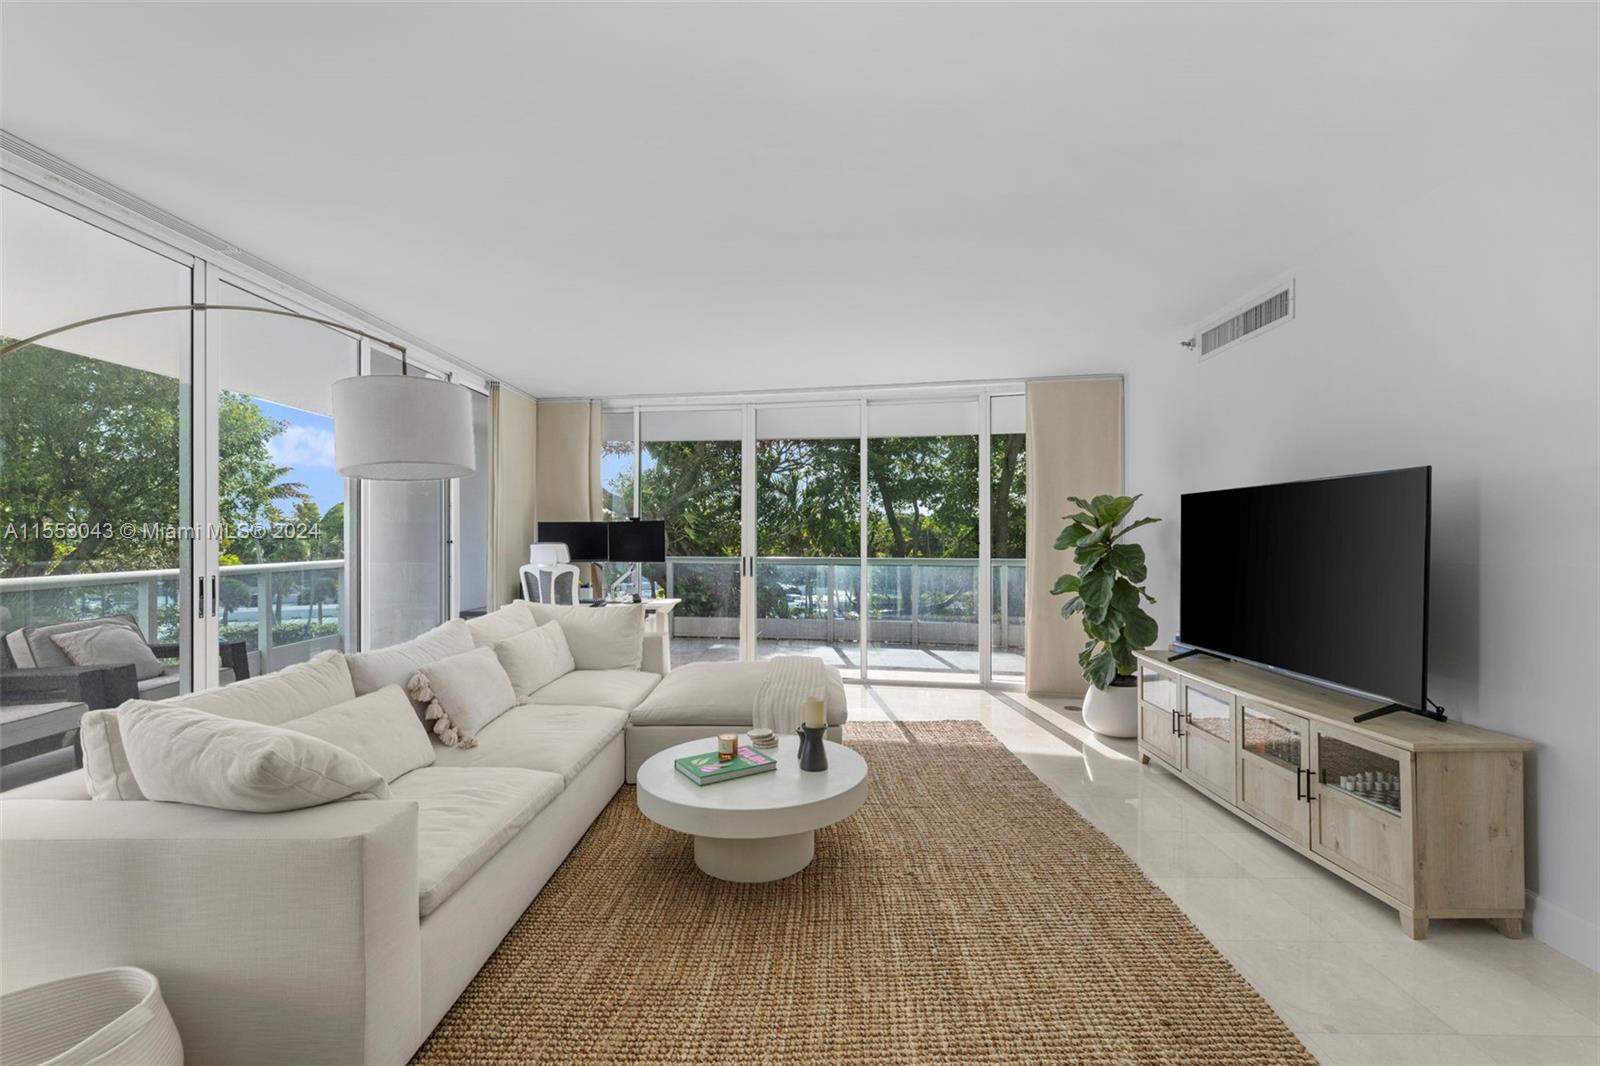 From the moment you pull-in to this urban oasis, you’ll see the magic of Bristol Towers. This iconic and luxurious building is in one of the most desirable parts of Brickell, minutes from Coconut Grove, Key Biscayne, & Coral Gables. This 2 bedroom, 2 bathroom spacious corner unit boasts 1500 SF of interior space and an oversized wrap around balcony overlooking lush tropical landscape. Floor-to-ceiling sliding glass doors and windows provide lots of natural light from every room. Unit features large bedrooms, closets and bathrooms, along with high end appliances & marble flooring in the living areas. This full service amenity building has a newly renovated pool & spa area, gym, assigned parking, free valet, on-site security, front desk/concierge service, on-site cafe and more.